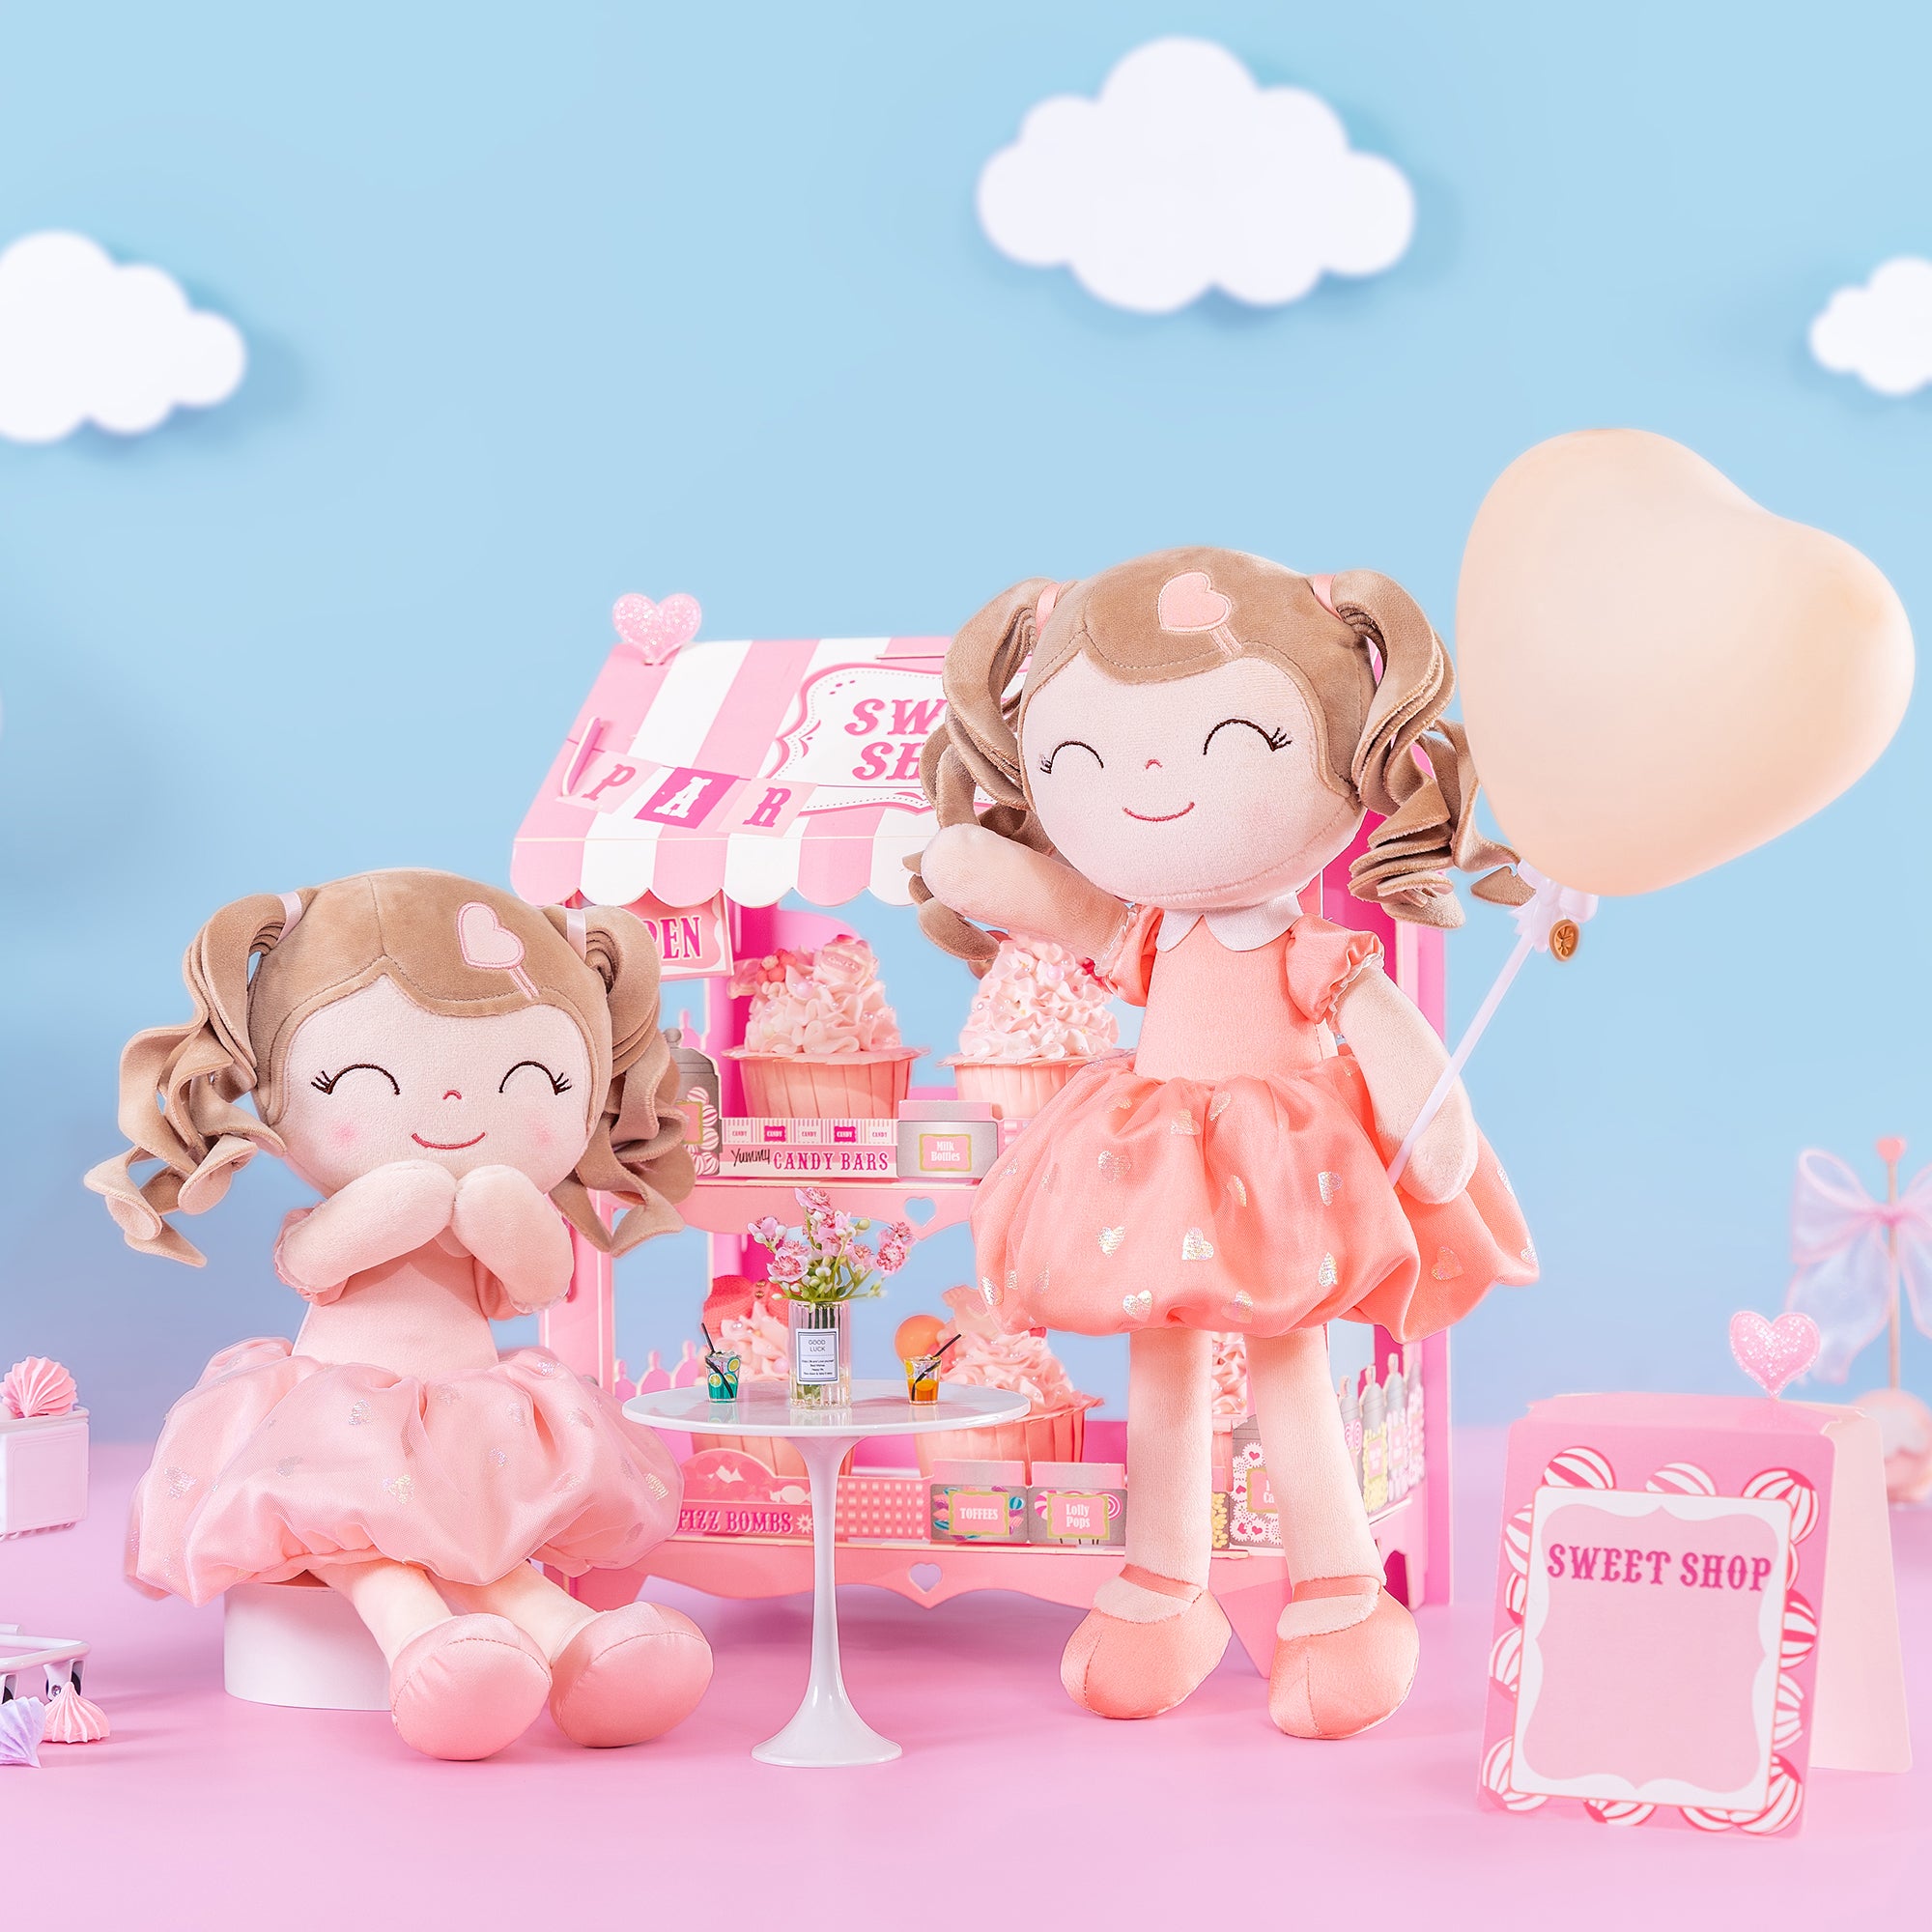 Personalized  Love Curly Princess Doll - Pink - Gloveleya Offical